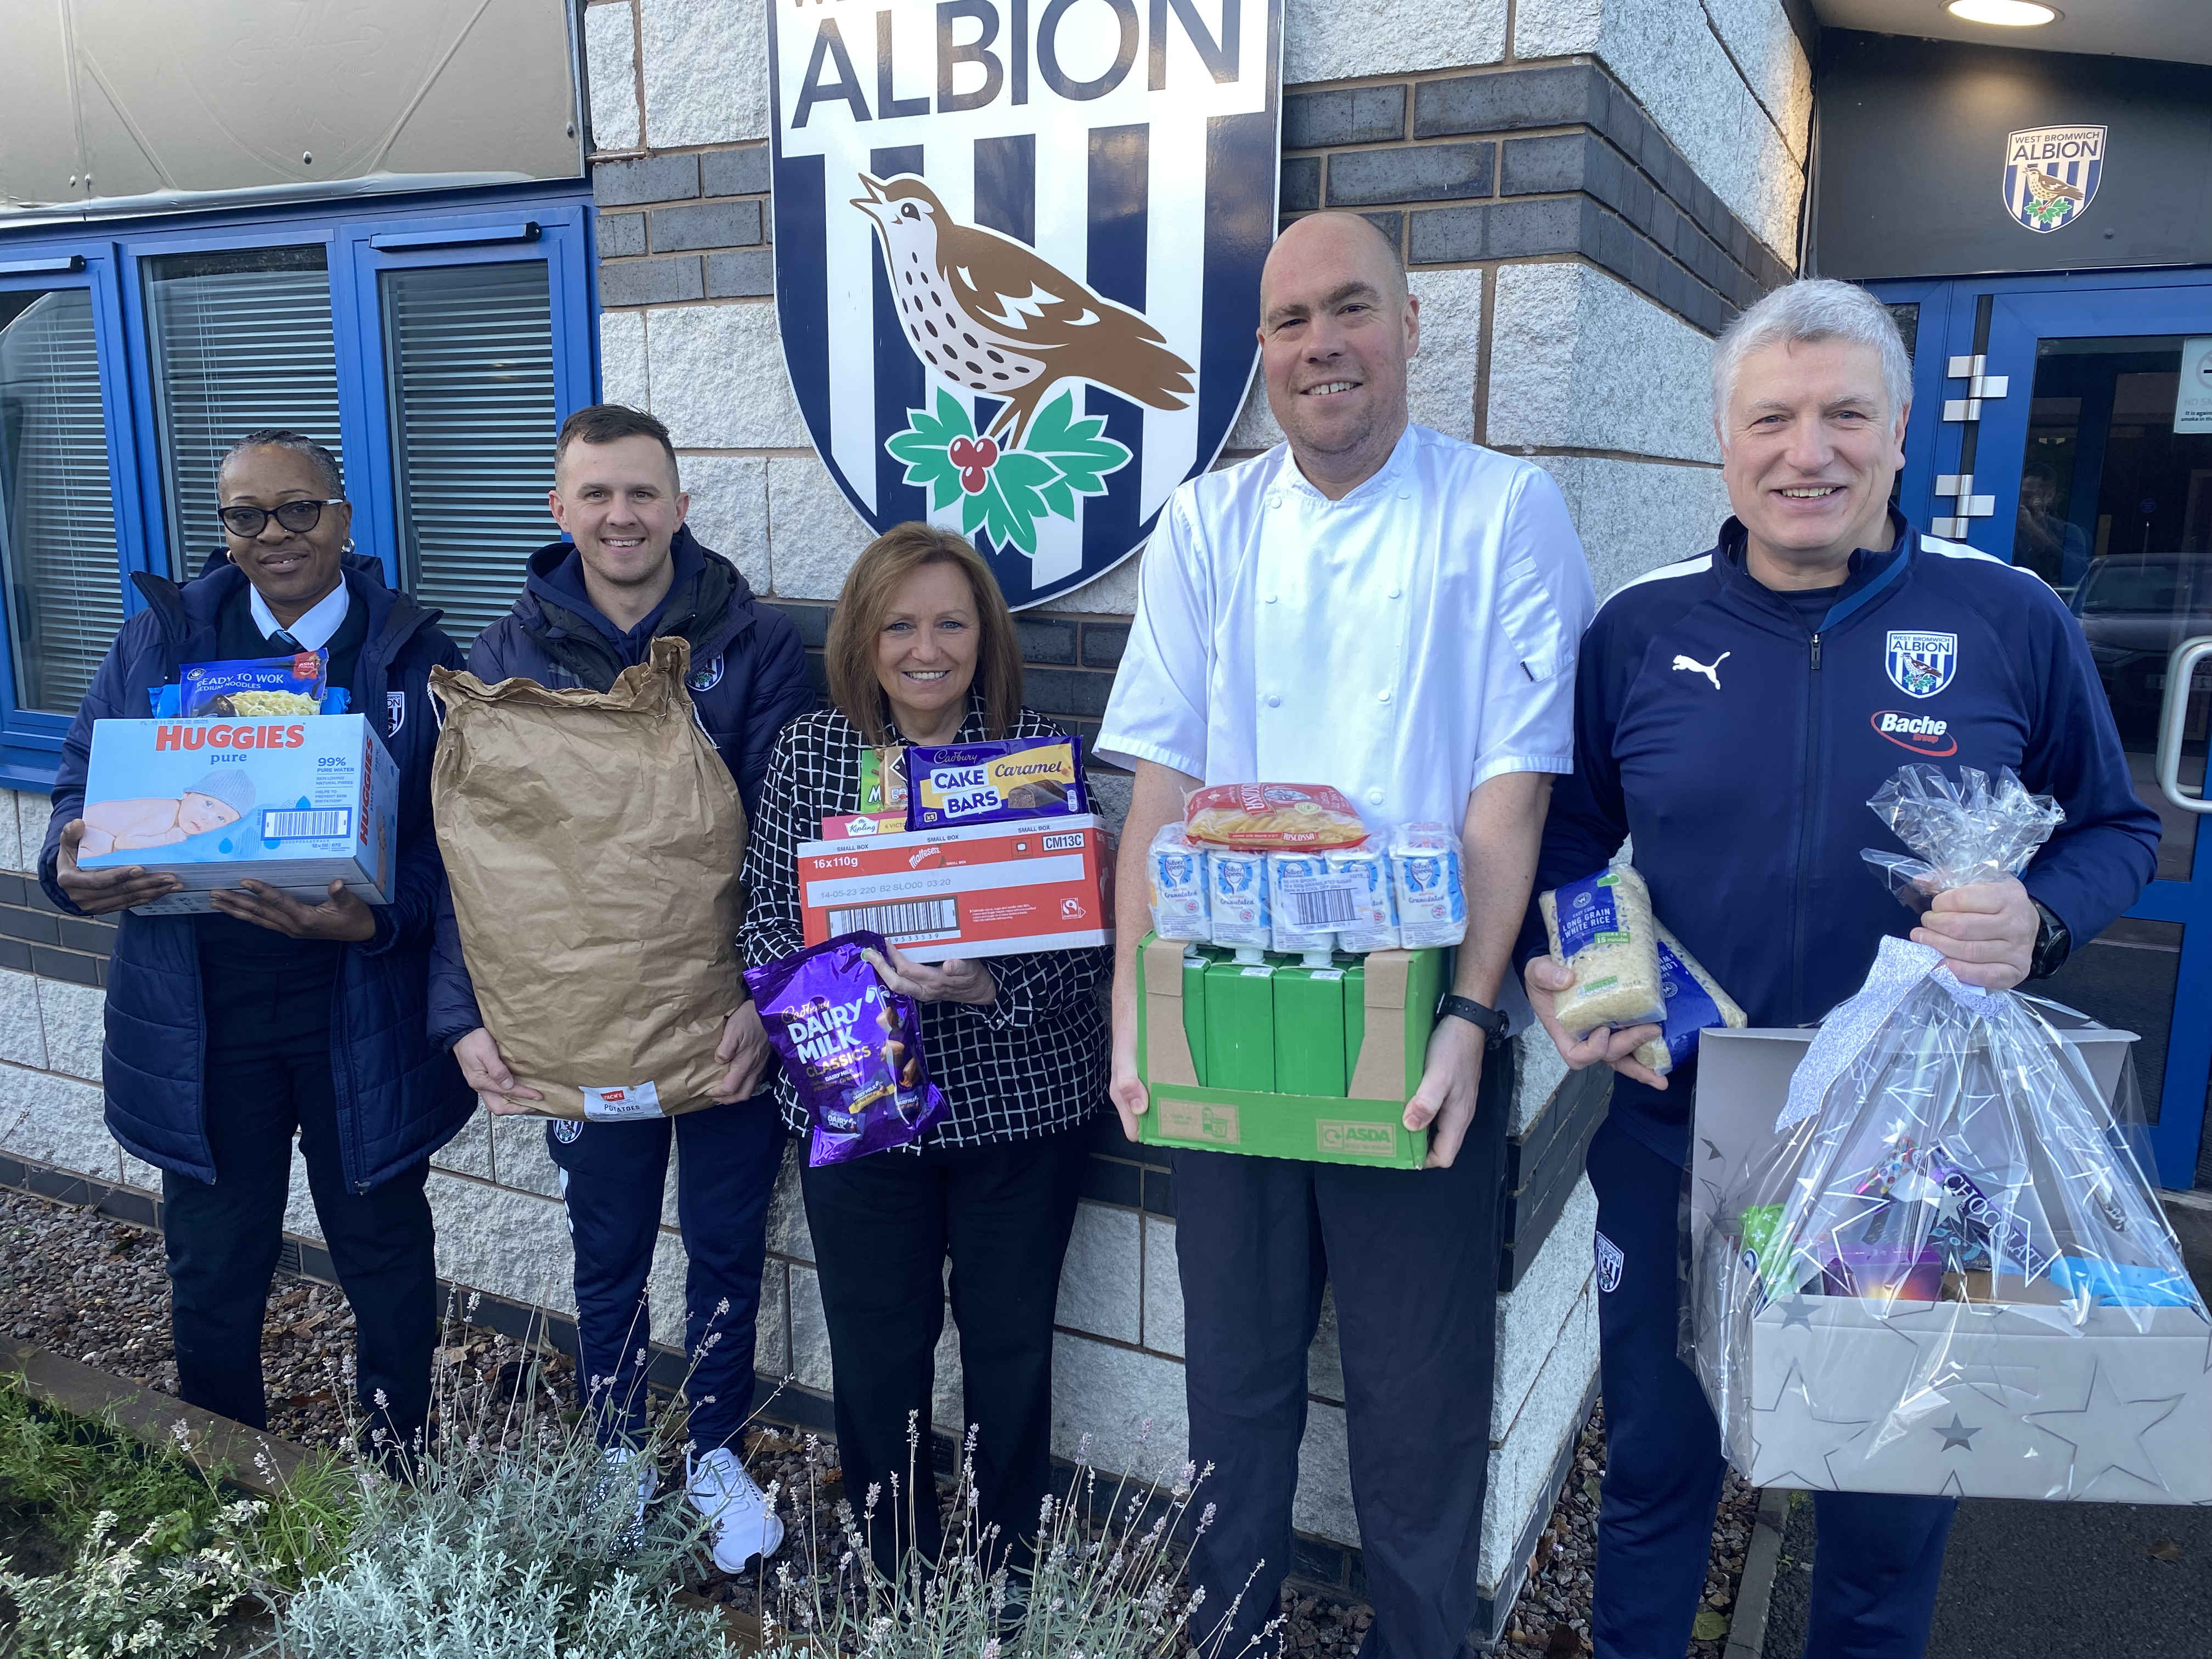 An image of Albion staff members with a foodbank donation